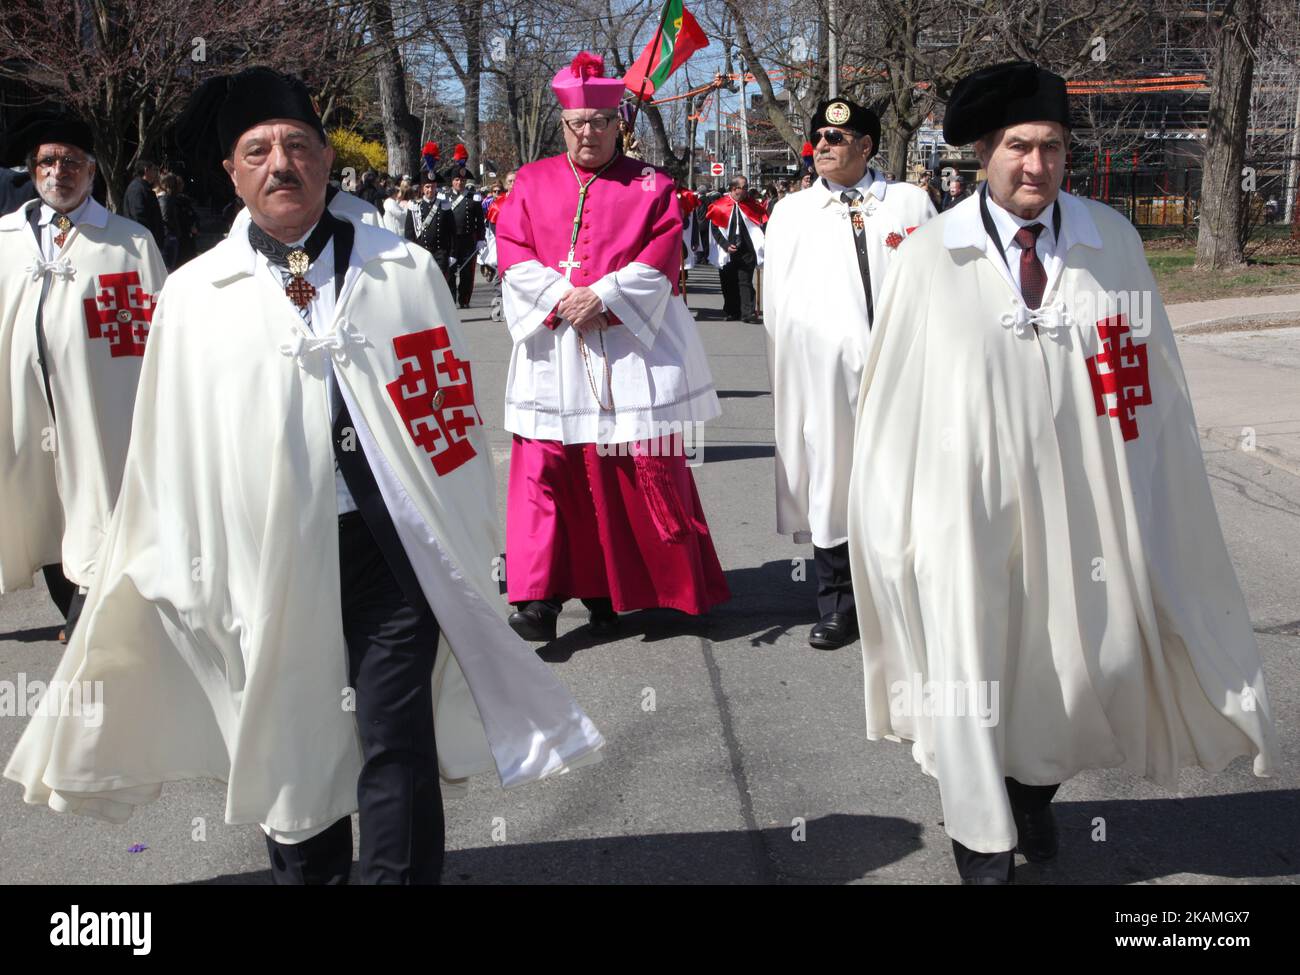 Thomas Christopher Collins, the Canadian cardinal of the Catholic Church and the Archbishop of Toronto takes part in the Good Friday procession in Little Italy in Toronto, Ontario, Canada, on April 14, 2017. The Saint Francis of Assisi Church and Little Italy community celebrated Good Friday with the traditional procession representing the events that led to the Crucifixion and Resurrection of Jesus Christ. (Photo by Creative Touch Imaging Ltd./NurPhoto) *** Please Use Credit from Credit Field *** Stock Photo